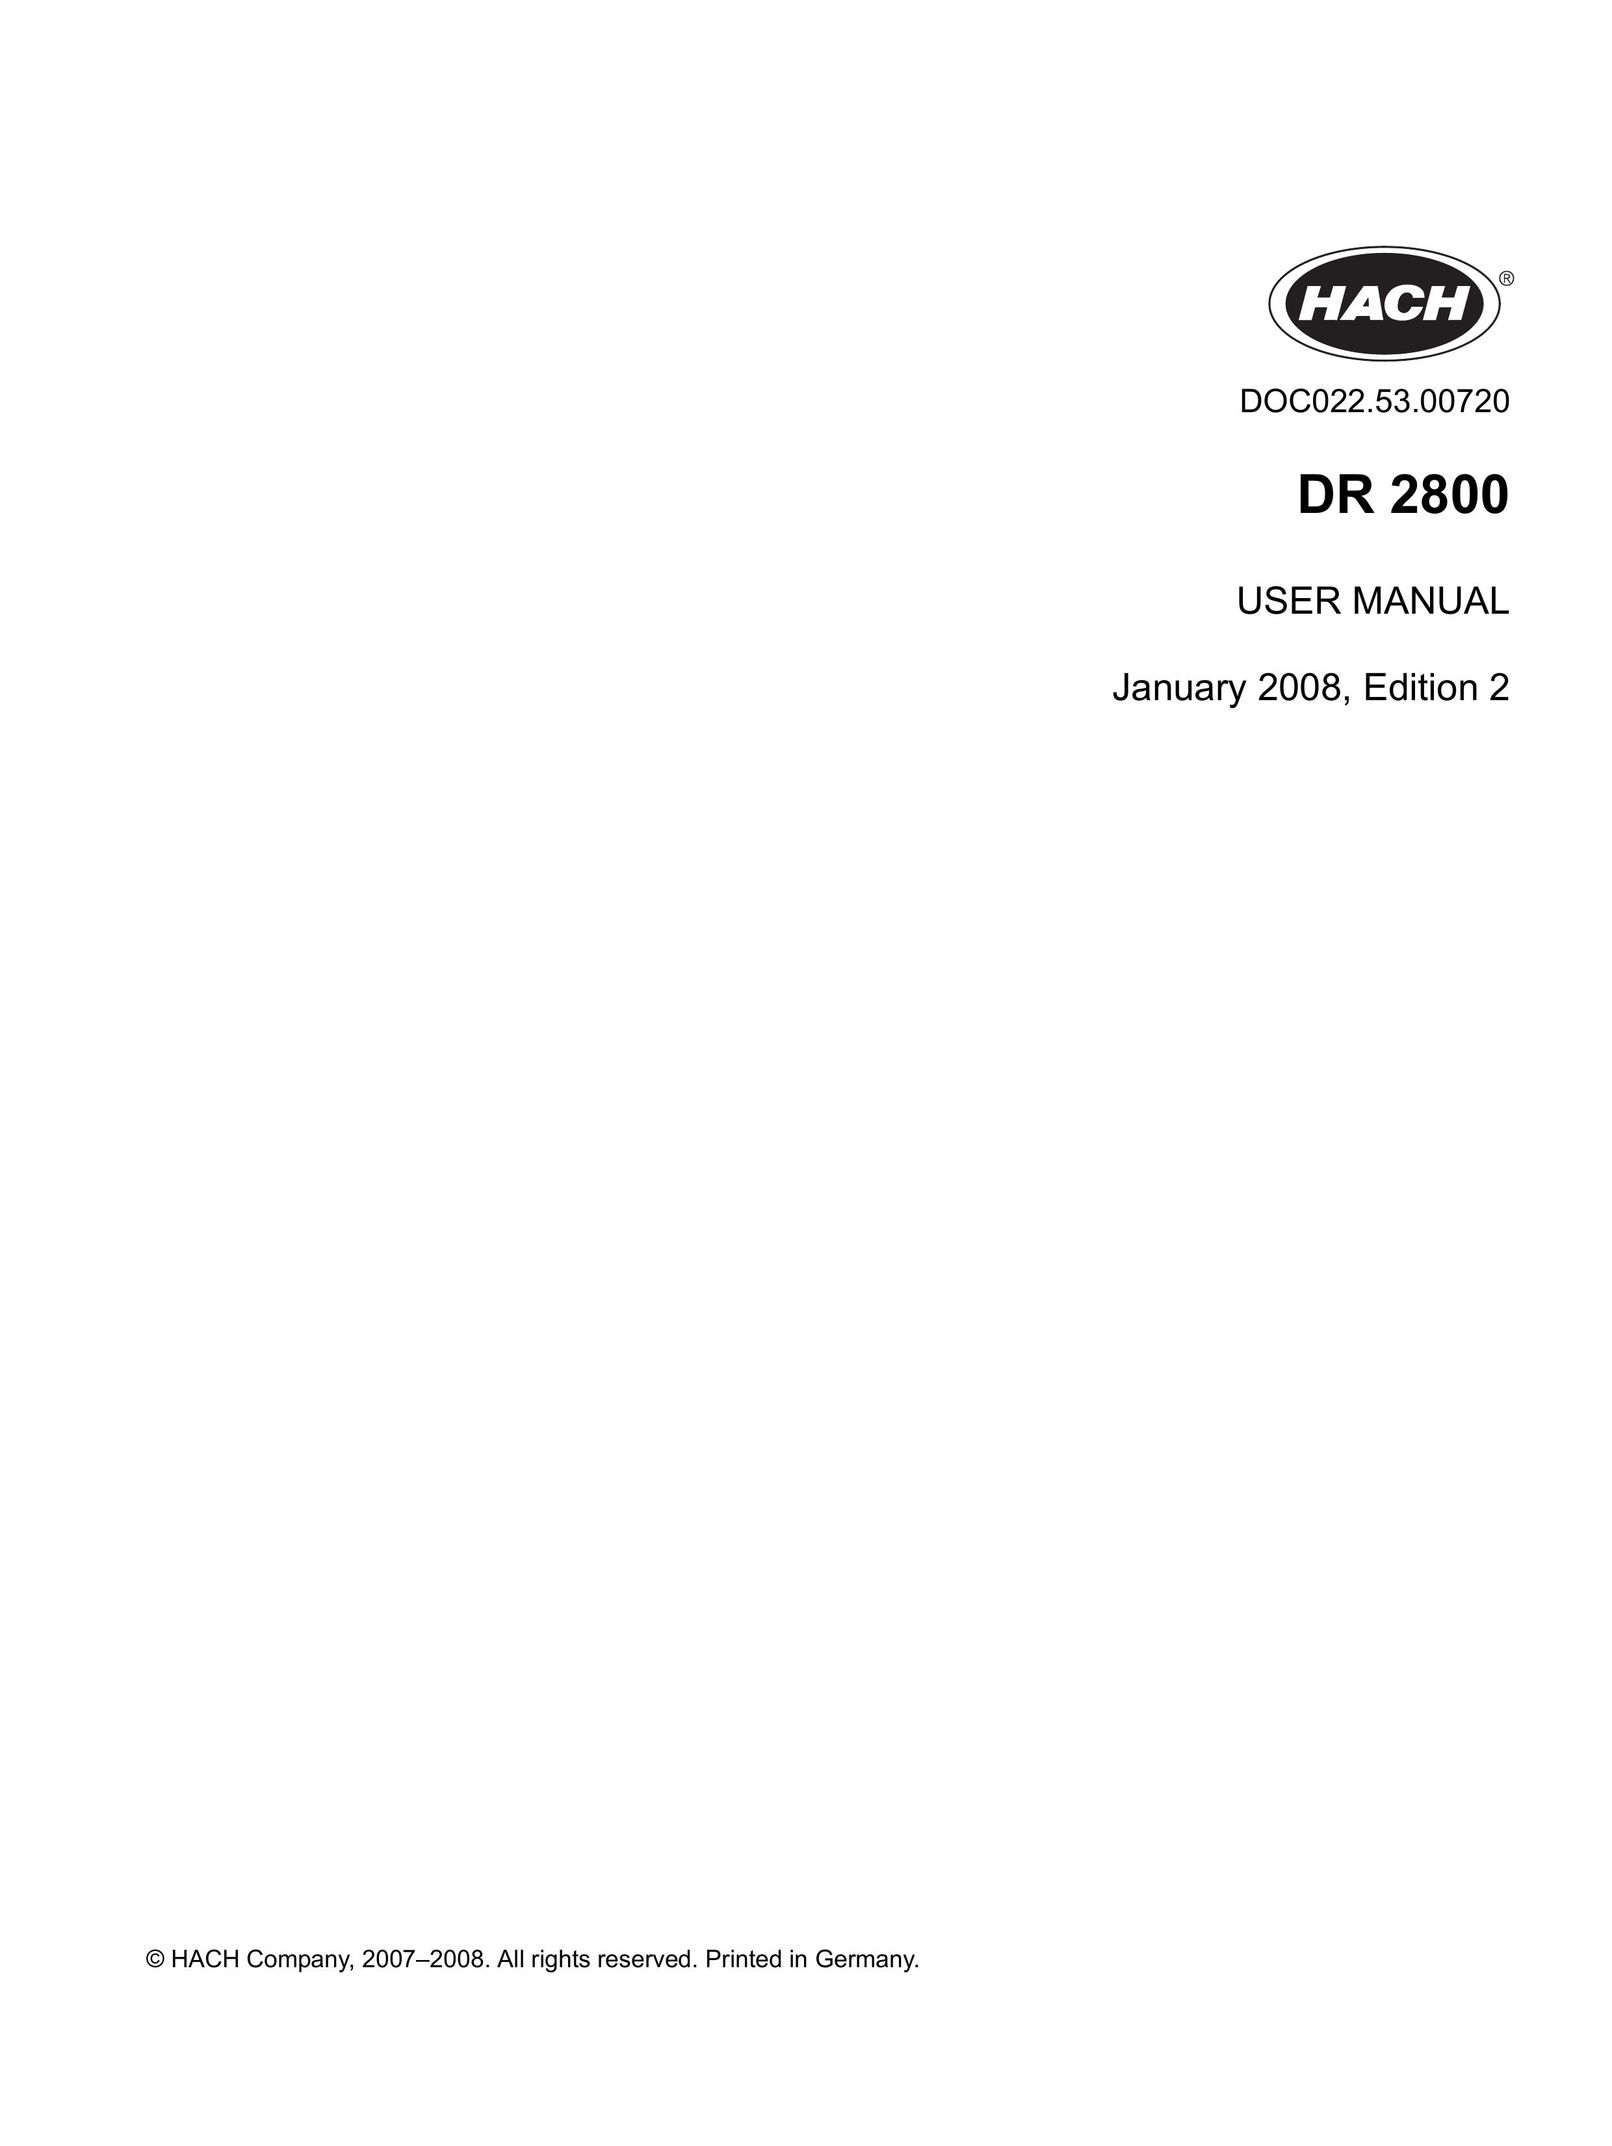 Hach DR 2800 Network Router User Manual